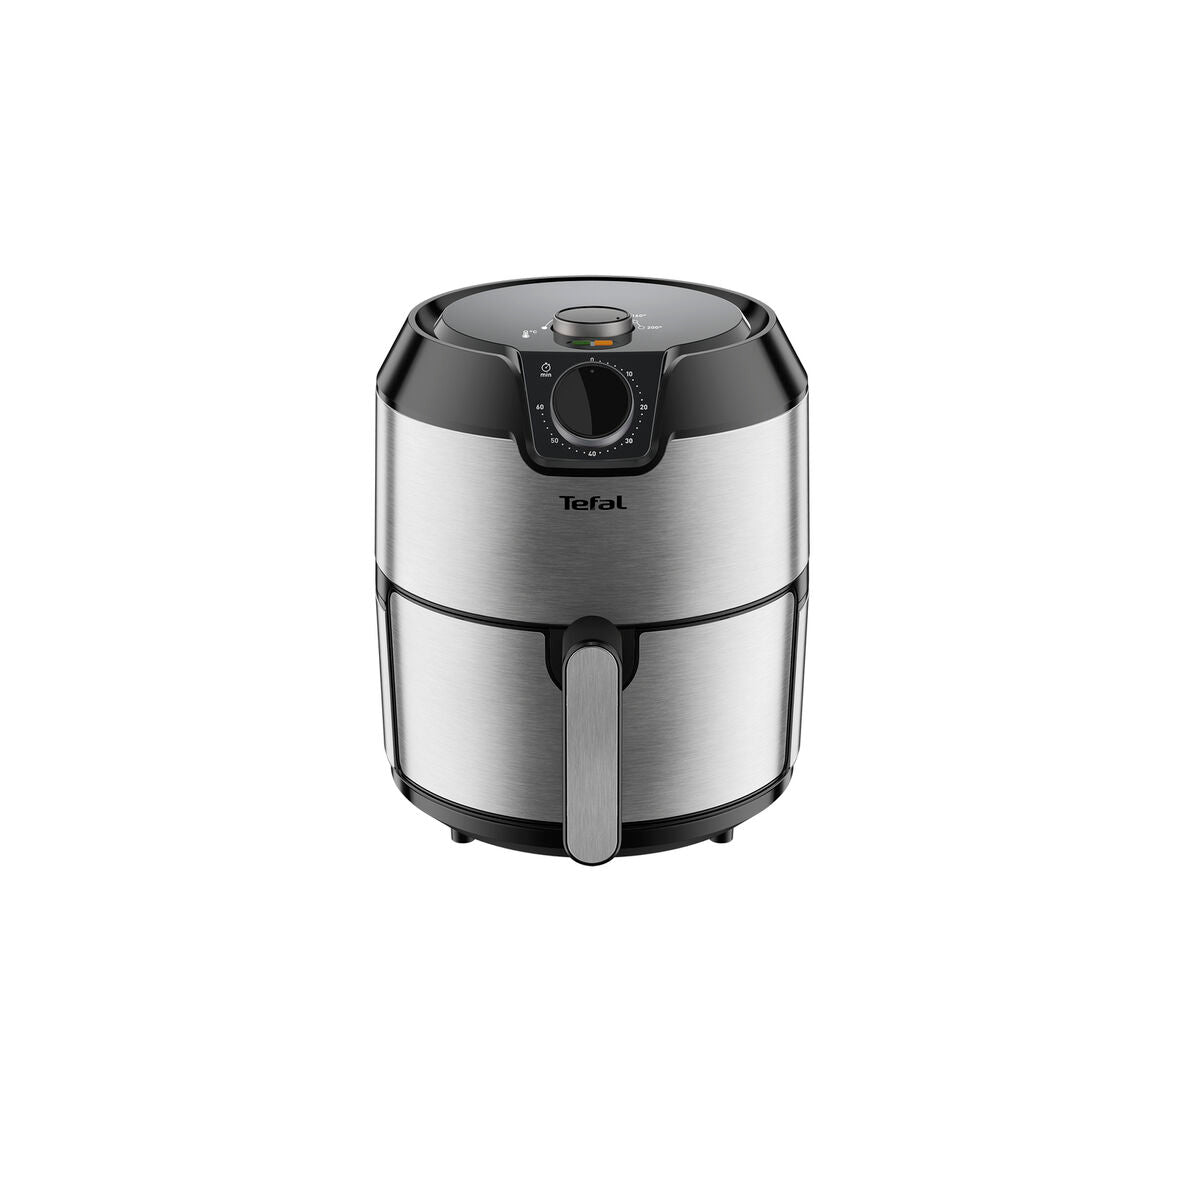 Luchtfriteuse Tefal Staal 4,2 L 1500 W